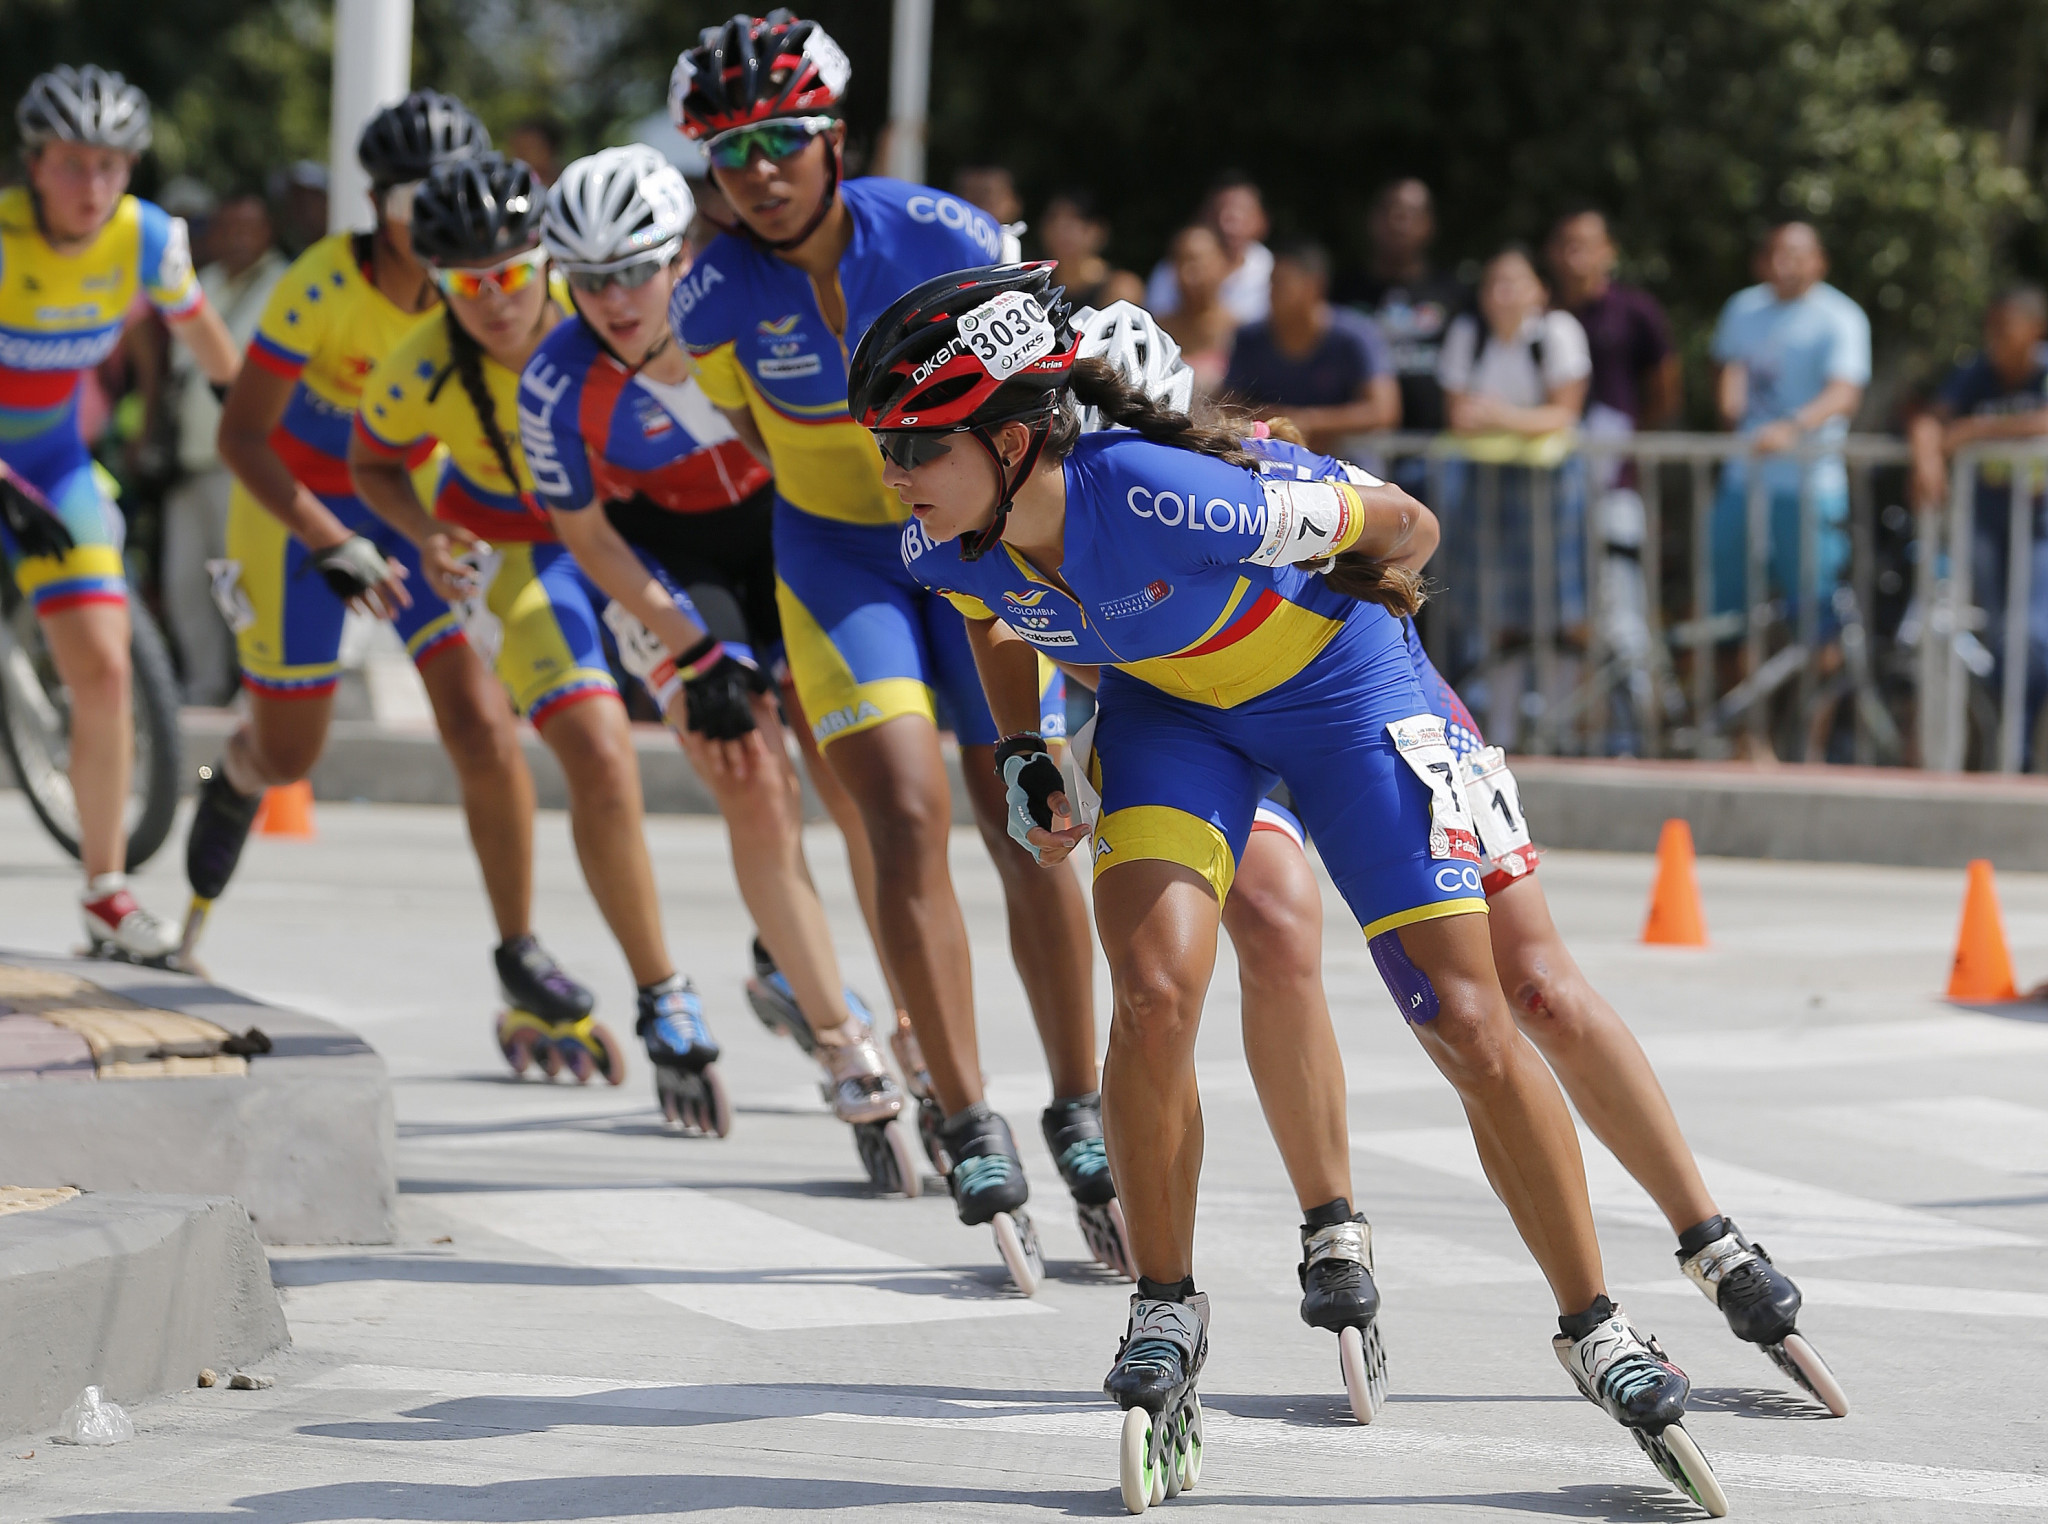 Colombia continue to dominate the Inline Speed Skating World Championships in Heerde, winning another three golds today ©Getty Images